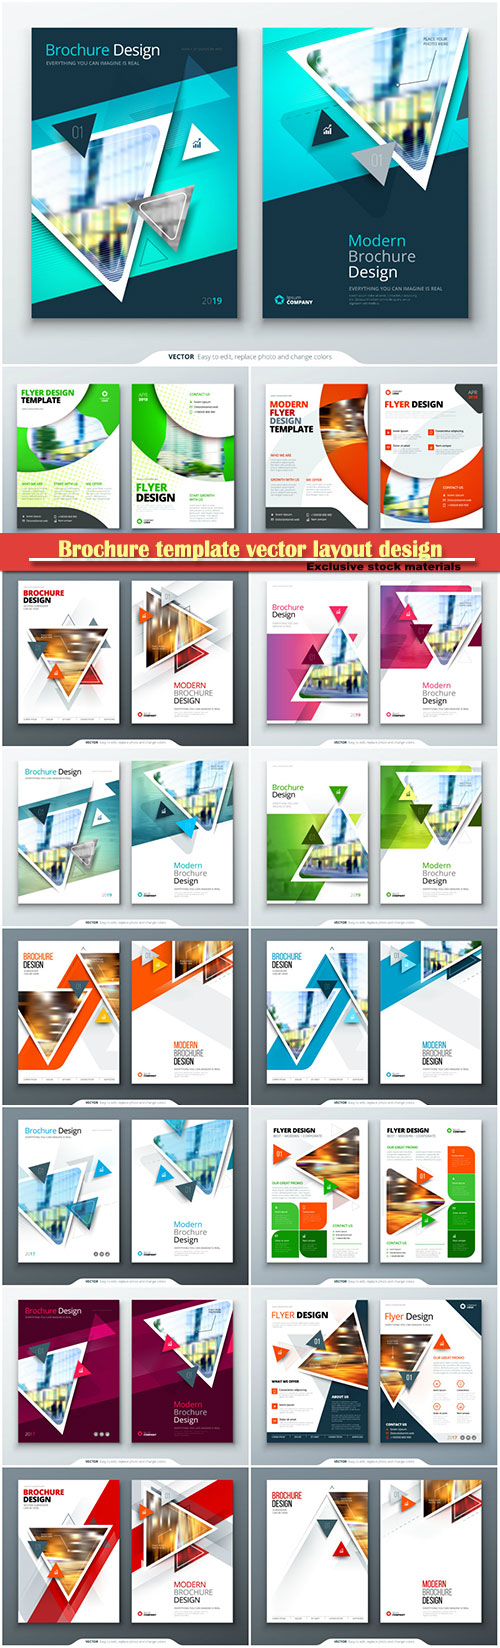 Brochure template vector layout design, corporate business annual report, magazine, flyer mockup